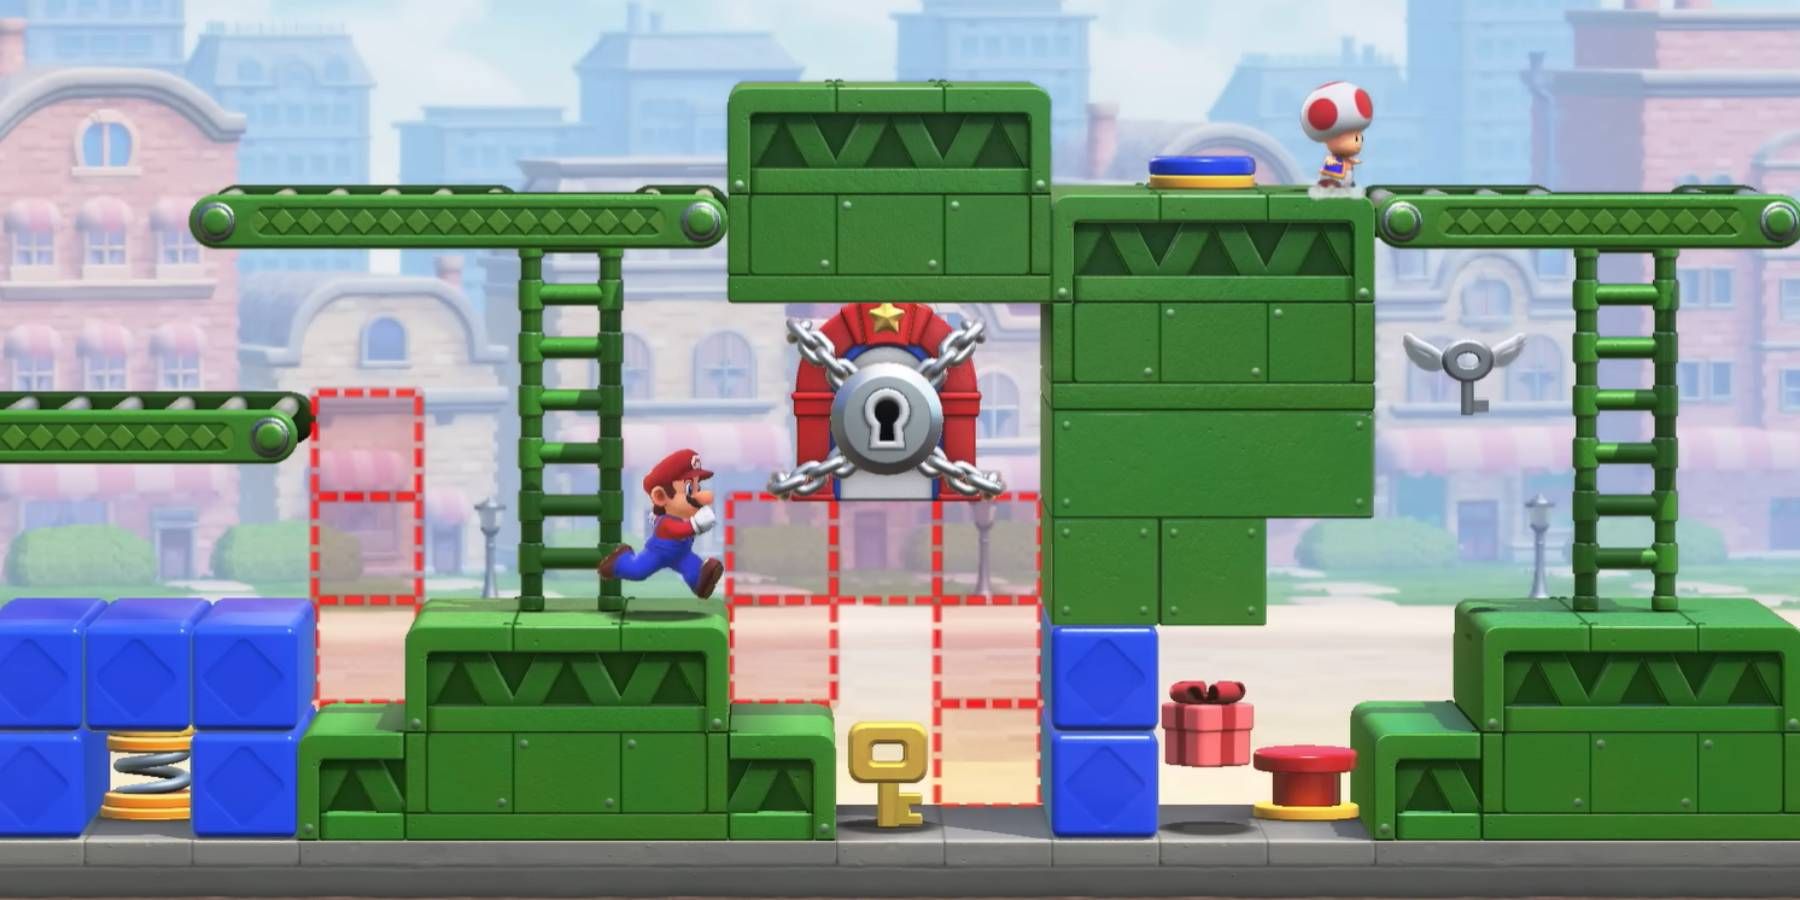 Mario vs. Donkey Kong - Every Character We Hope to Play As in Co-Op